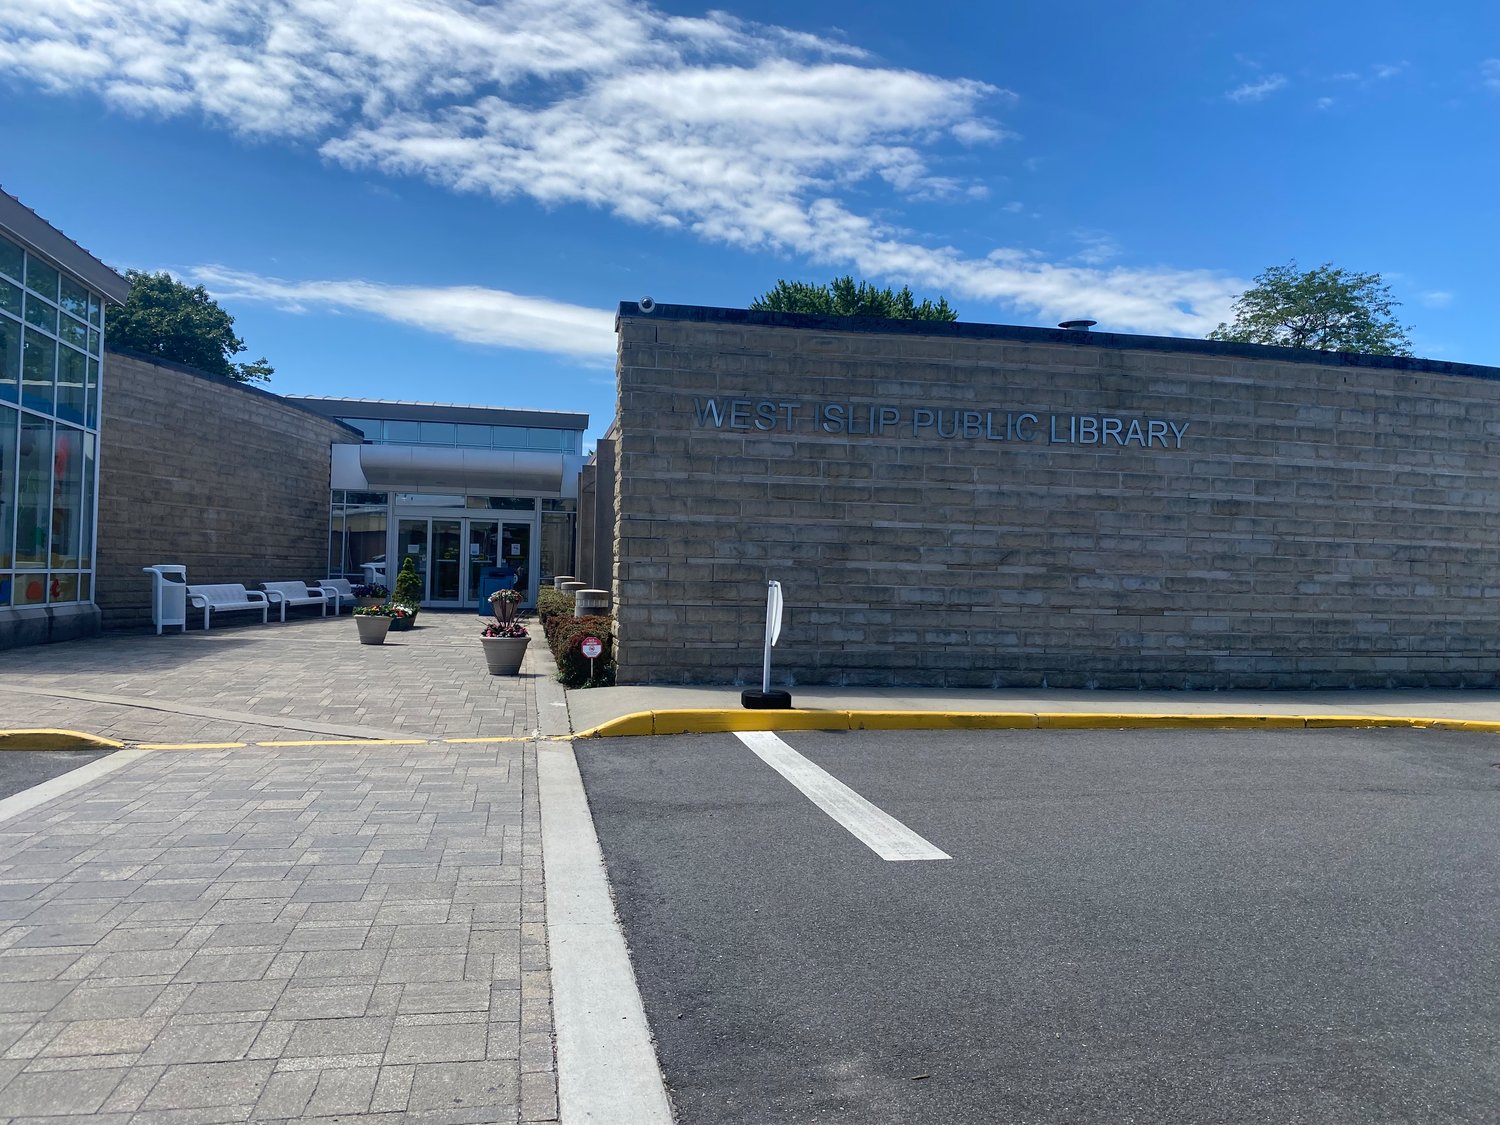 There are lots of great activities and events to enjoy at the West Islip Library this summer.